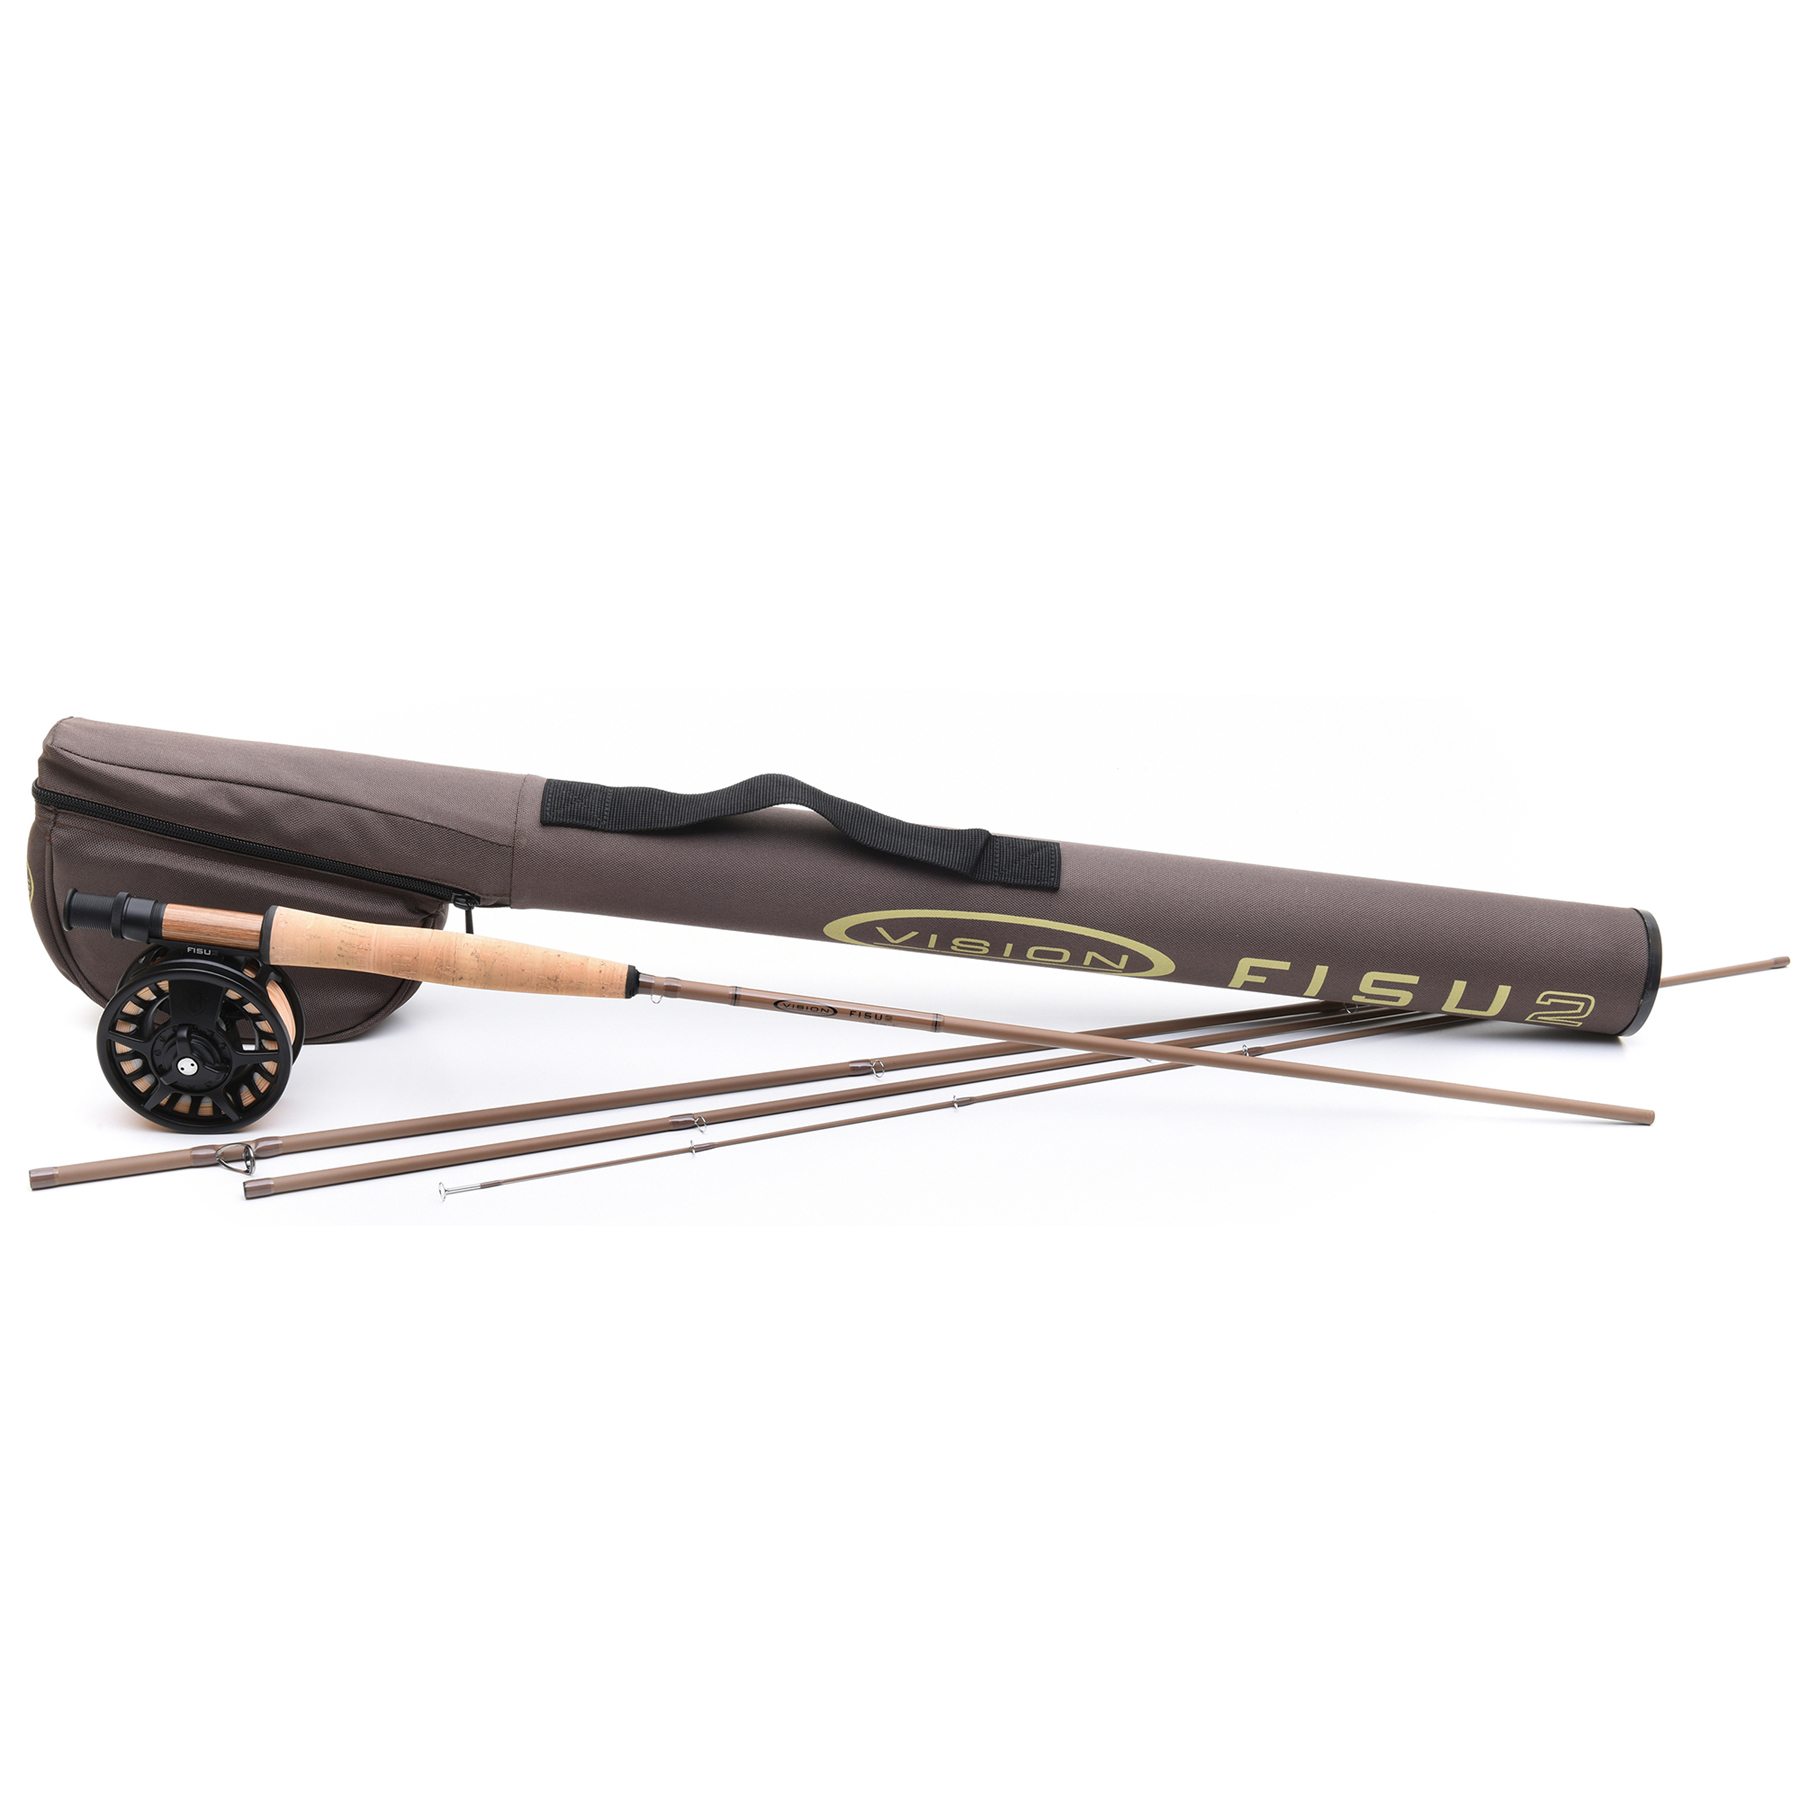 Vision Outfit Fisu 2 Fly Kit 9 Foot #5 For Fly Fishing (Length 9ft / 2.75m)